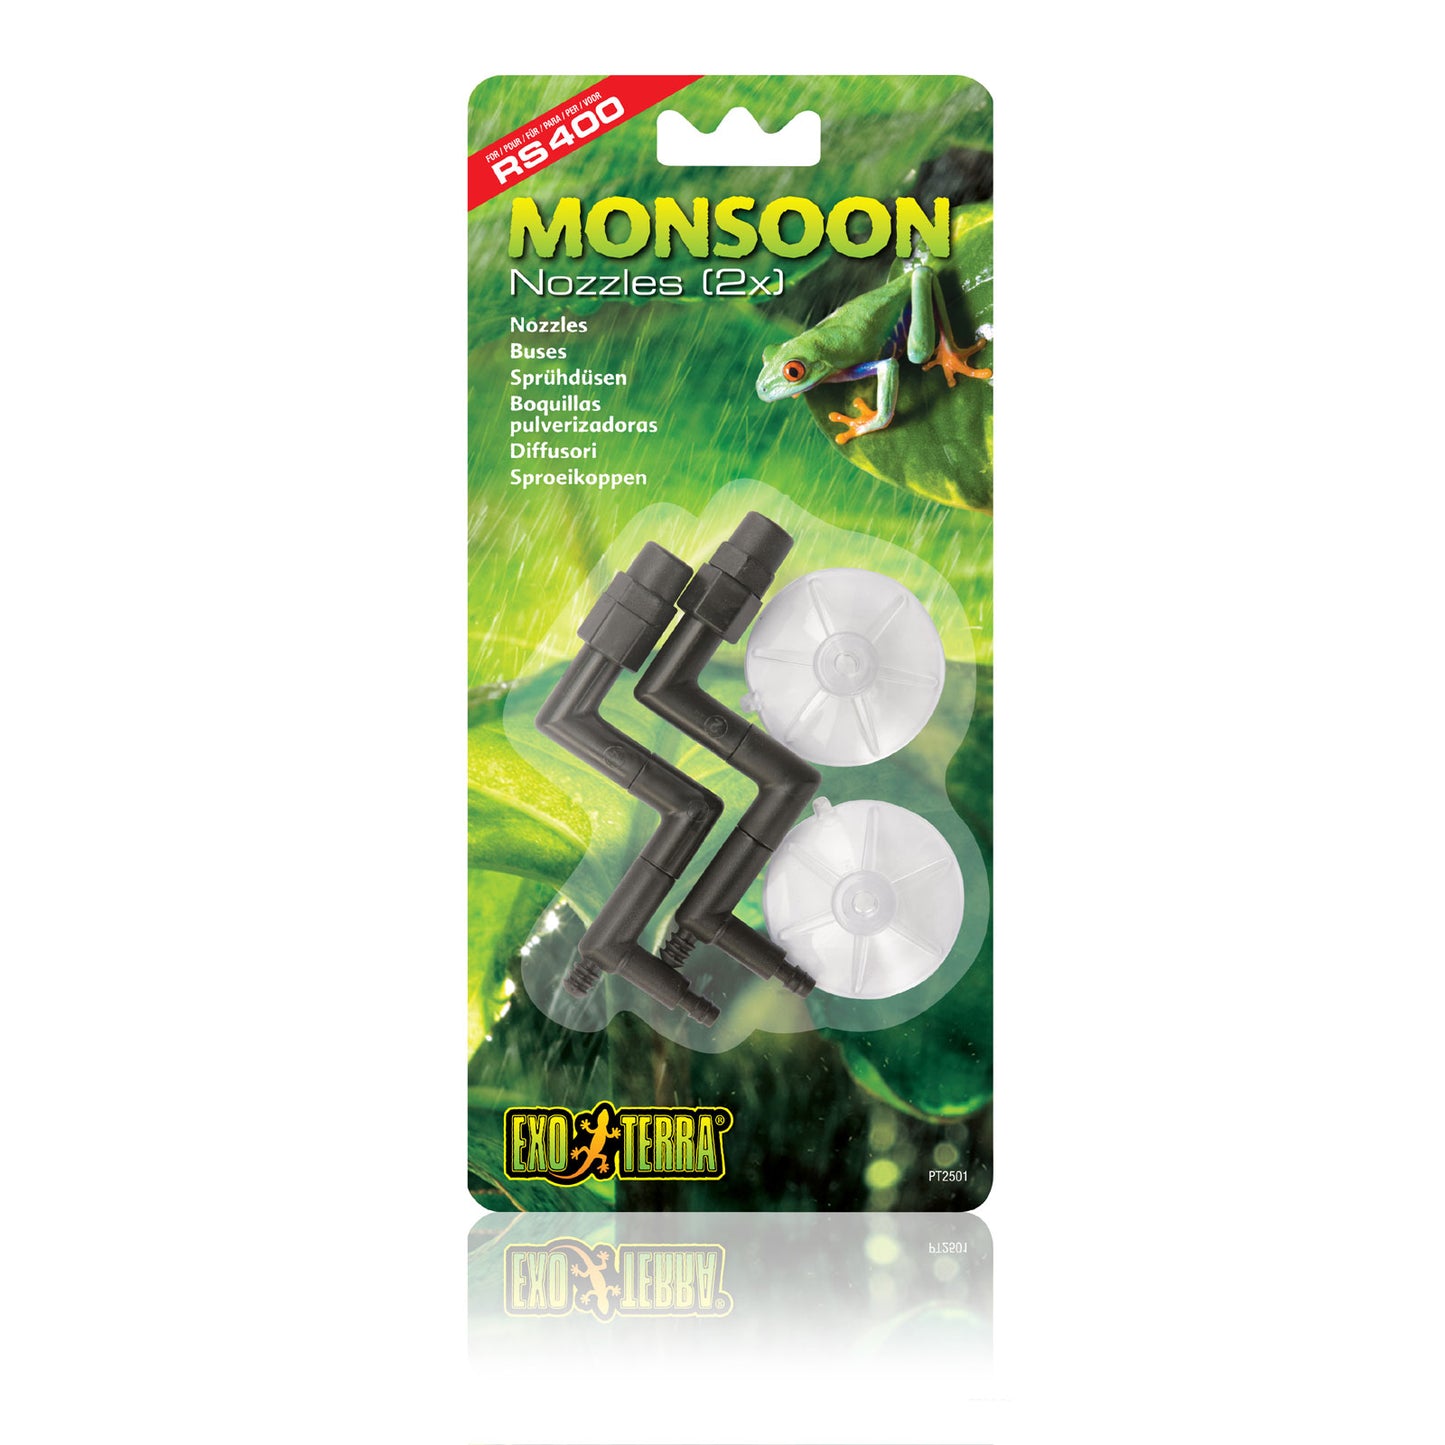 Exo Terra Replacement 2 Nozzles with Suction Cups for PT2495 Monsoon RS400